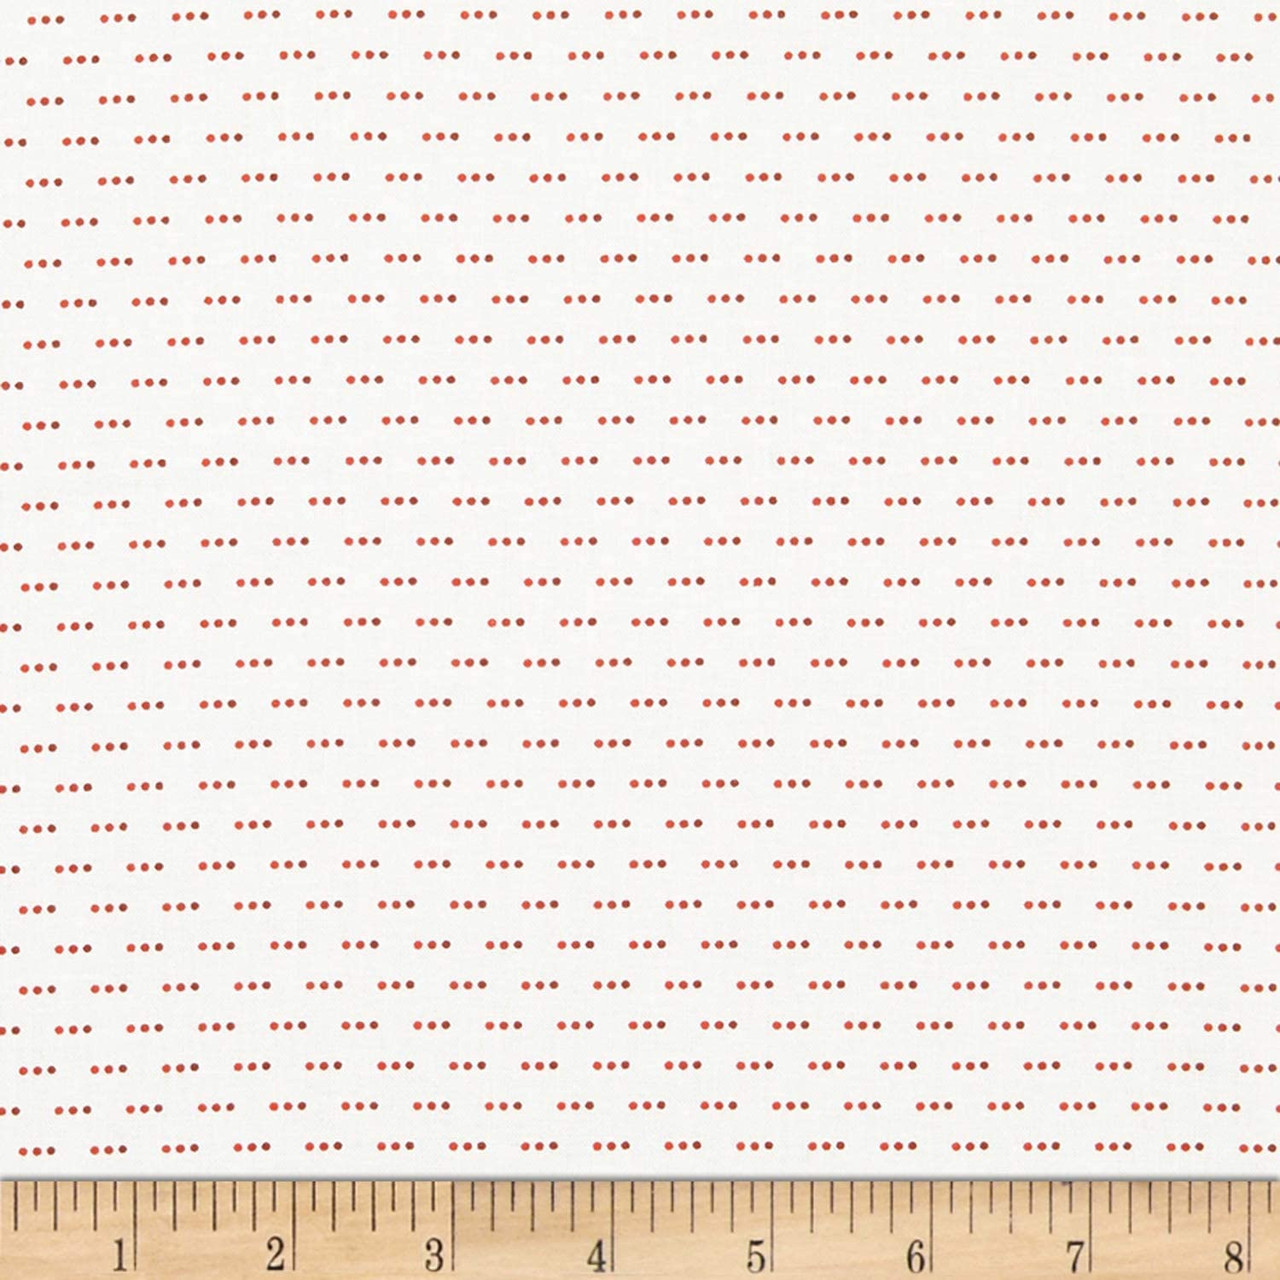 Stof Fabrics 4512-324 Colour Fun Row Dots White & Red Cotton Fabric By The Yard